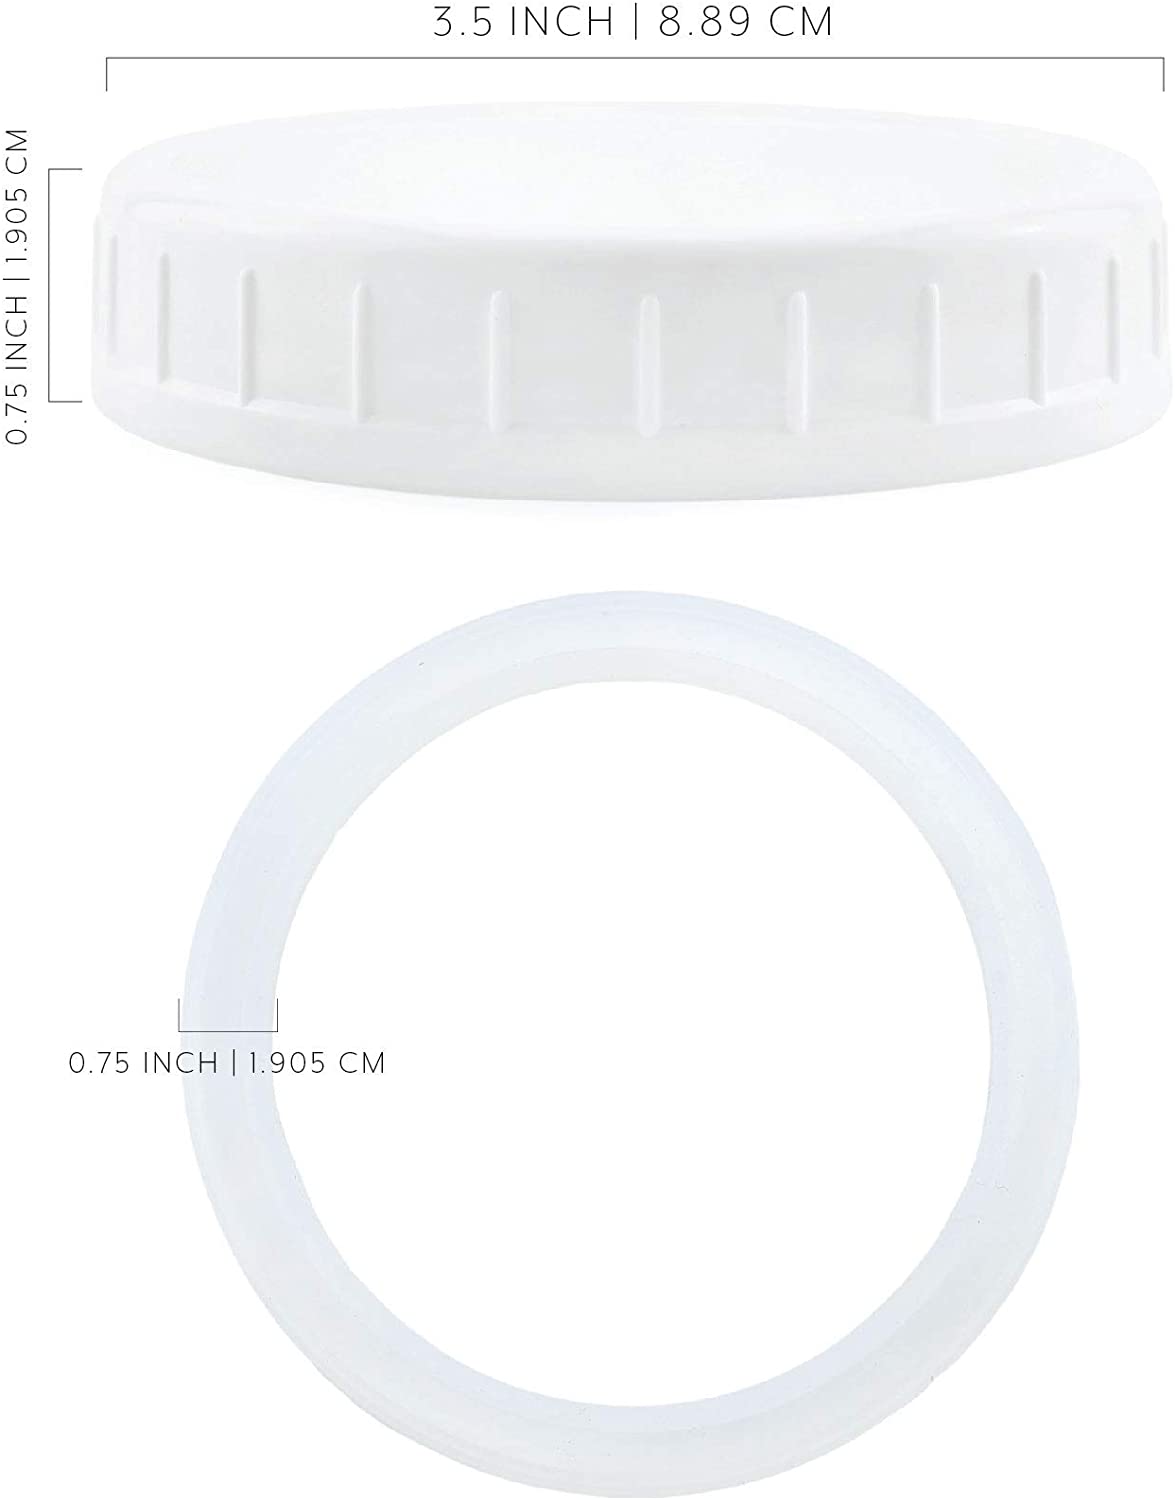 Wide Mouth Plastic Mason Jar Lids Unlined White Ribbed Lids